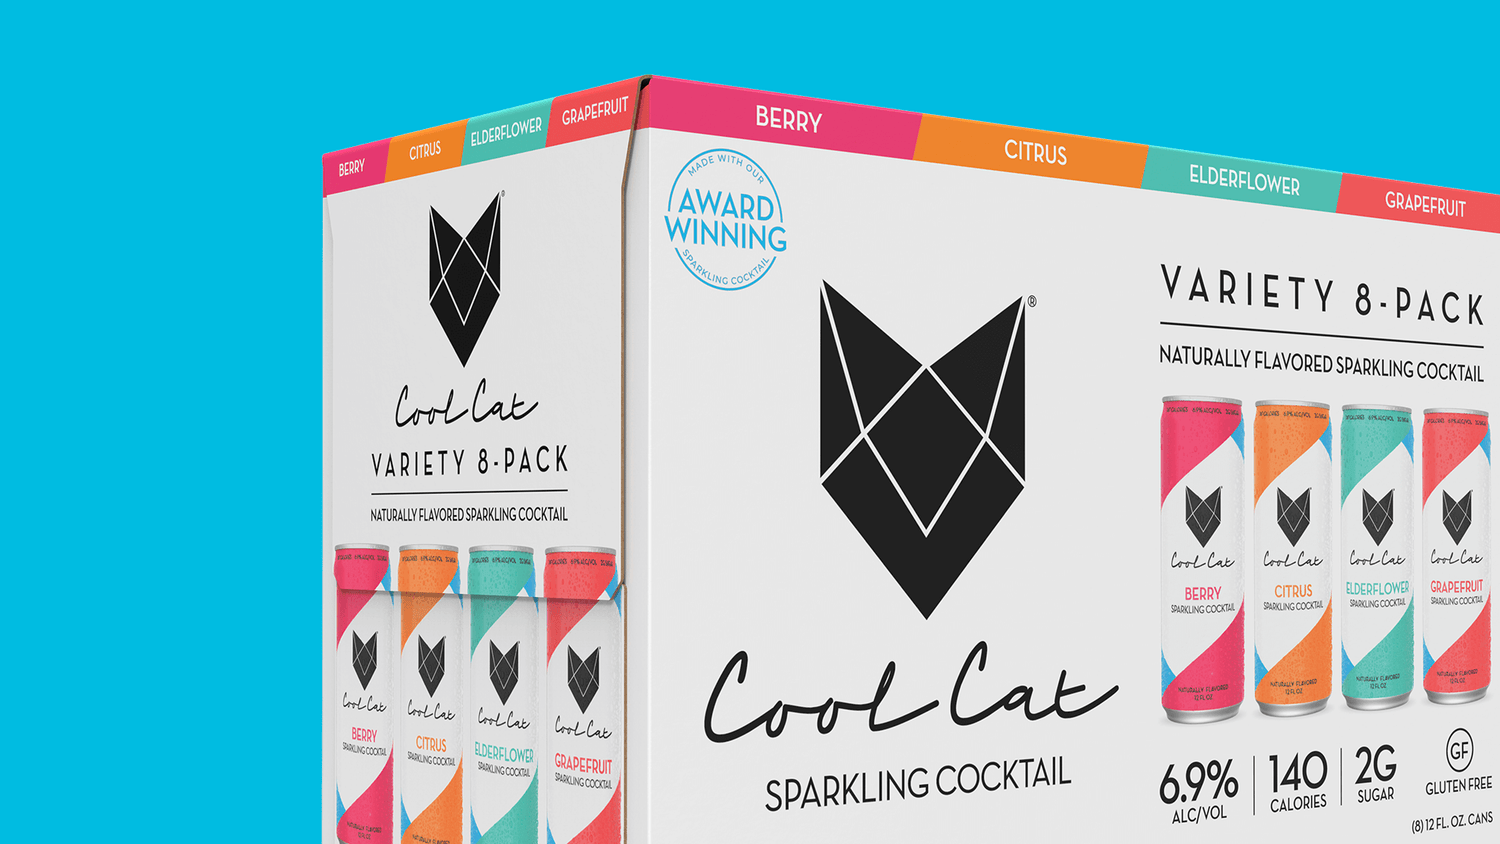 The Variety 8-Pack of Cool Cat Sparkling Cocktail.